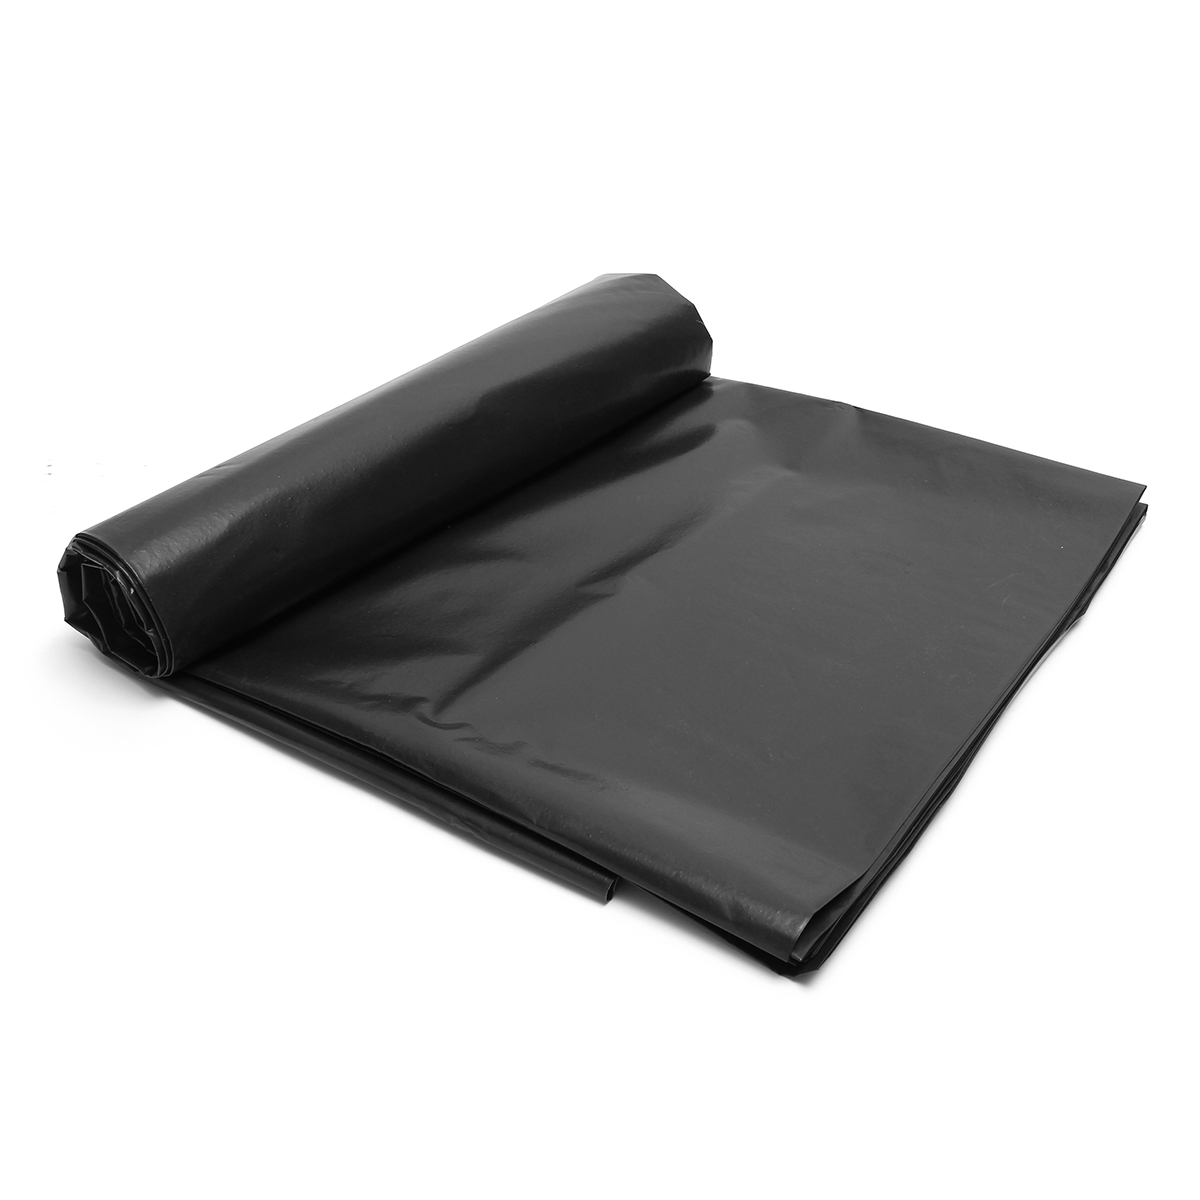 Impermeable-Membrane-Fish-Pond-Liners-Reinforced-HDPE-Durable-for-Garden-Pools-Landscaping-1226891-1